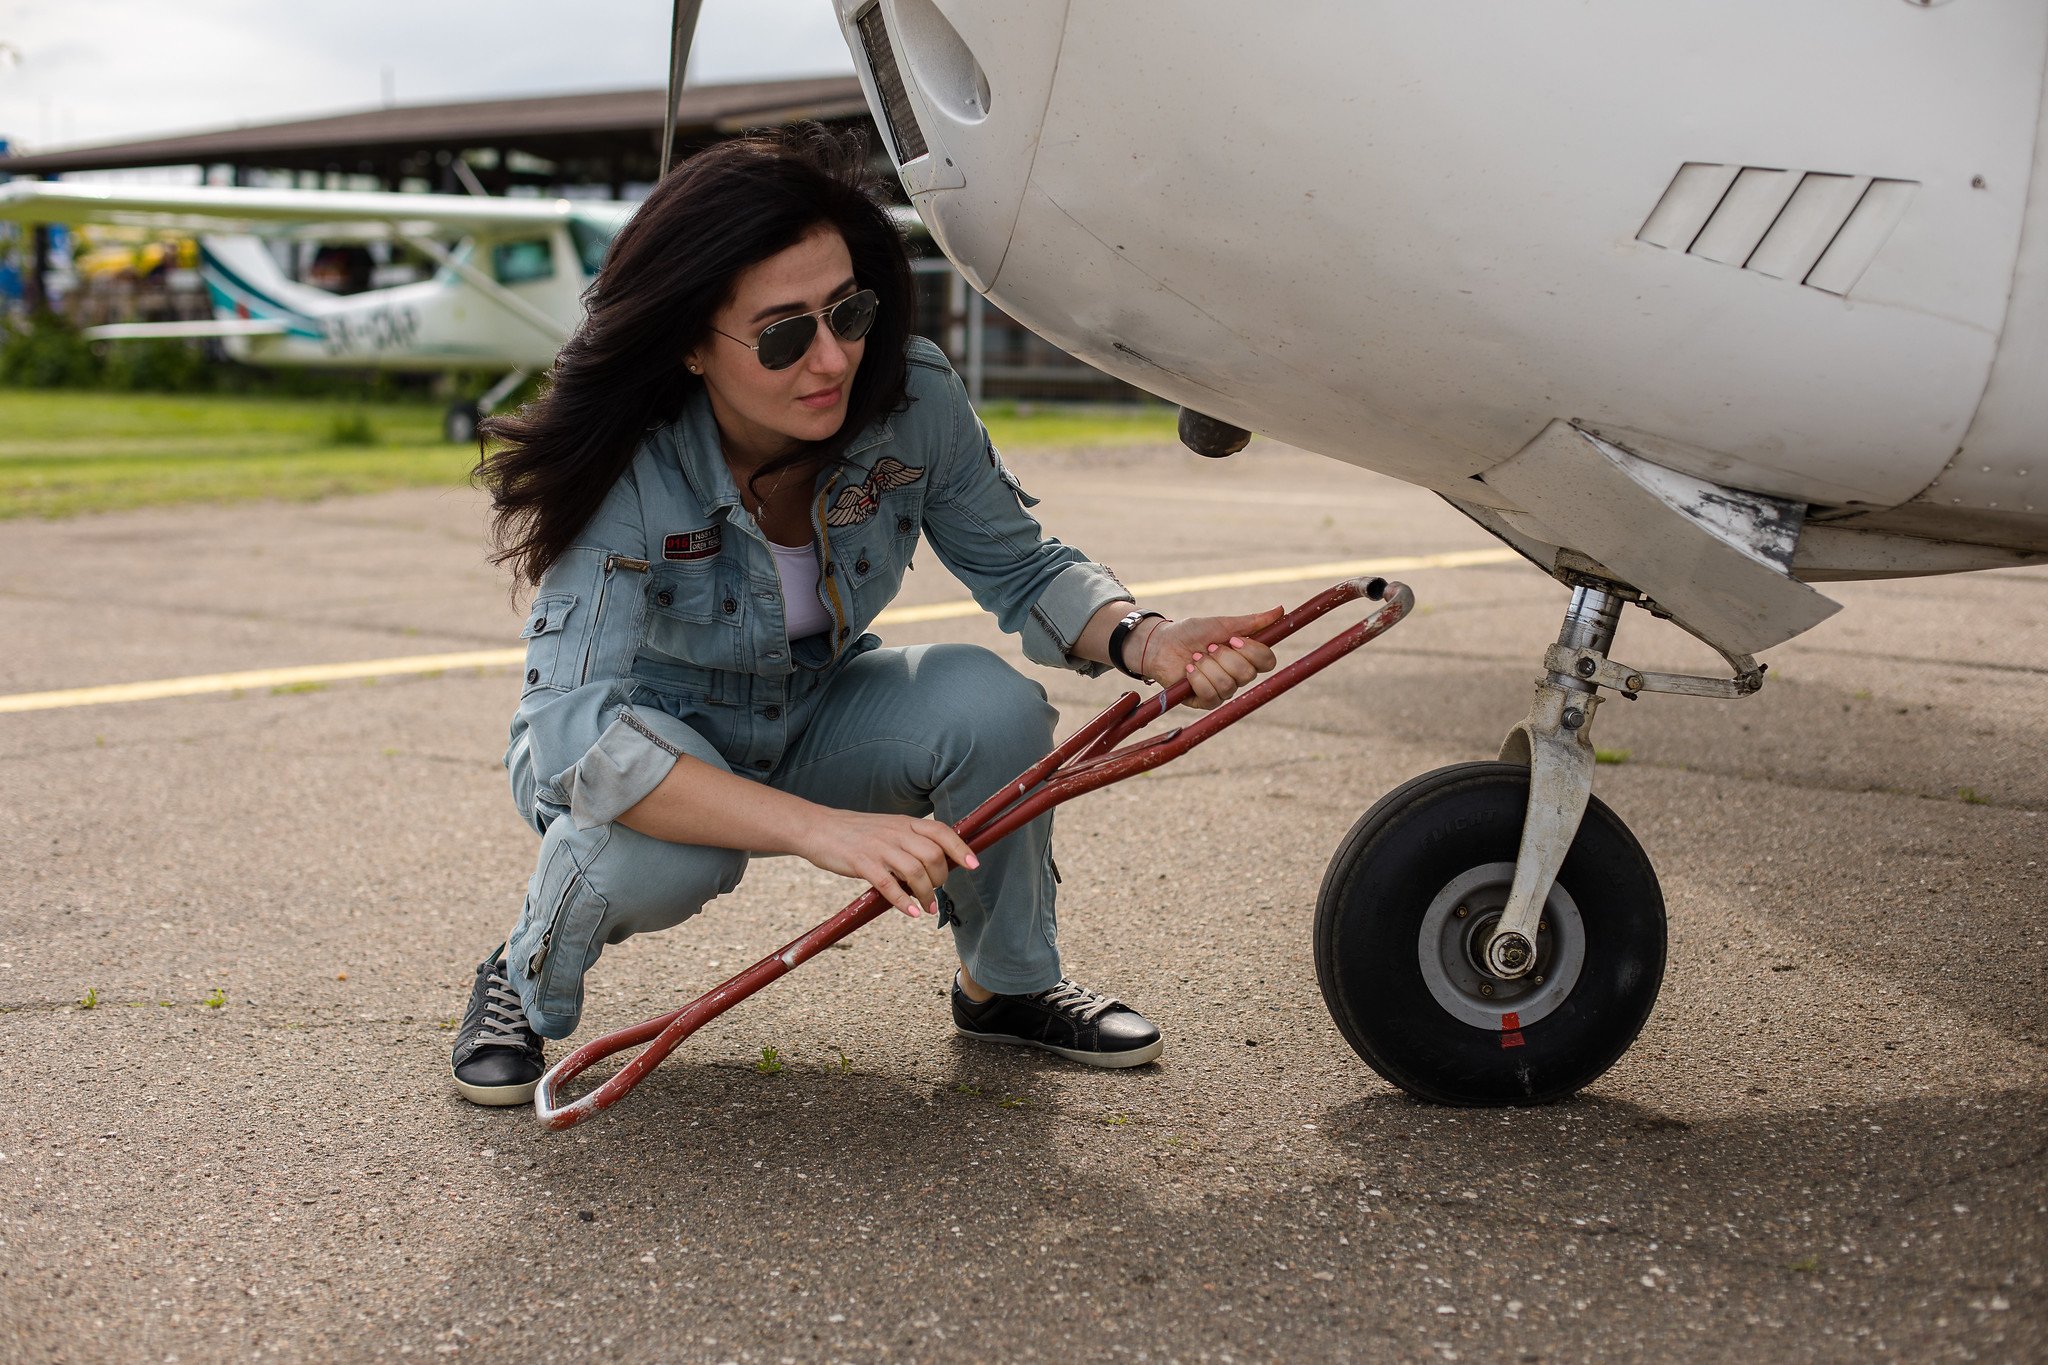 Woman with dark hair and sunglasses kneels down holding a red metal tool beside a light aircraft